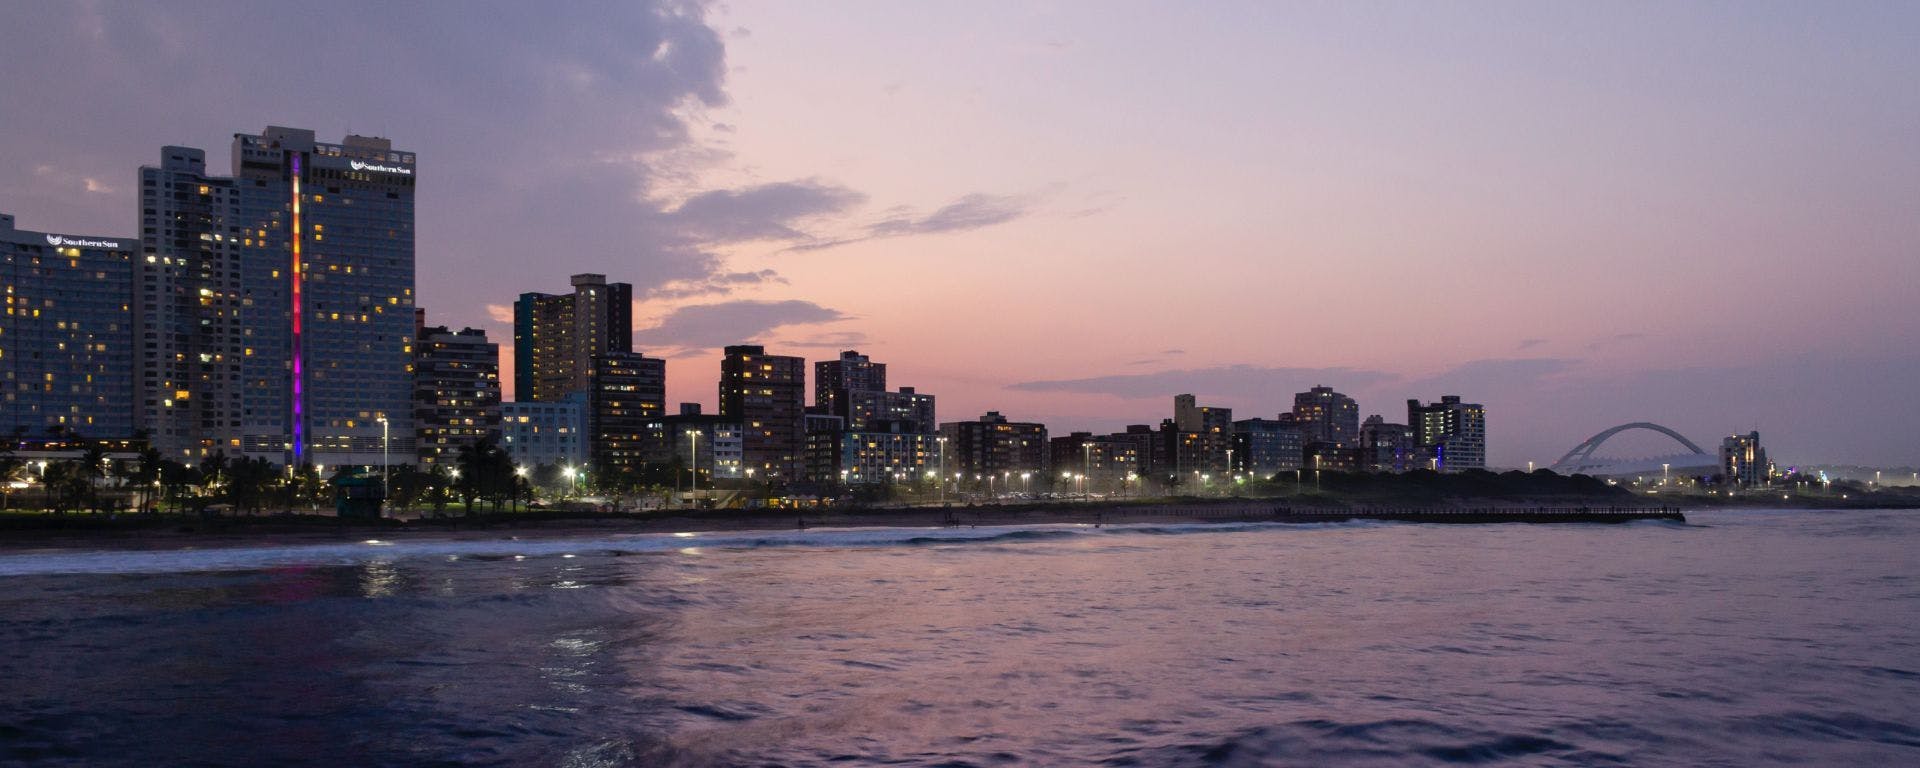 North Beach - Durban (South Africa) - Card Background Image